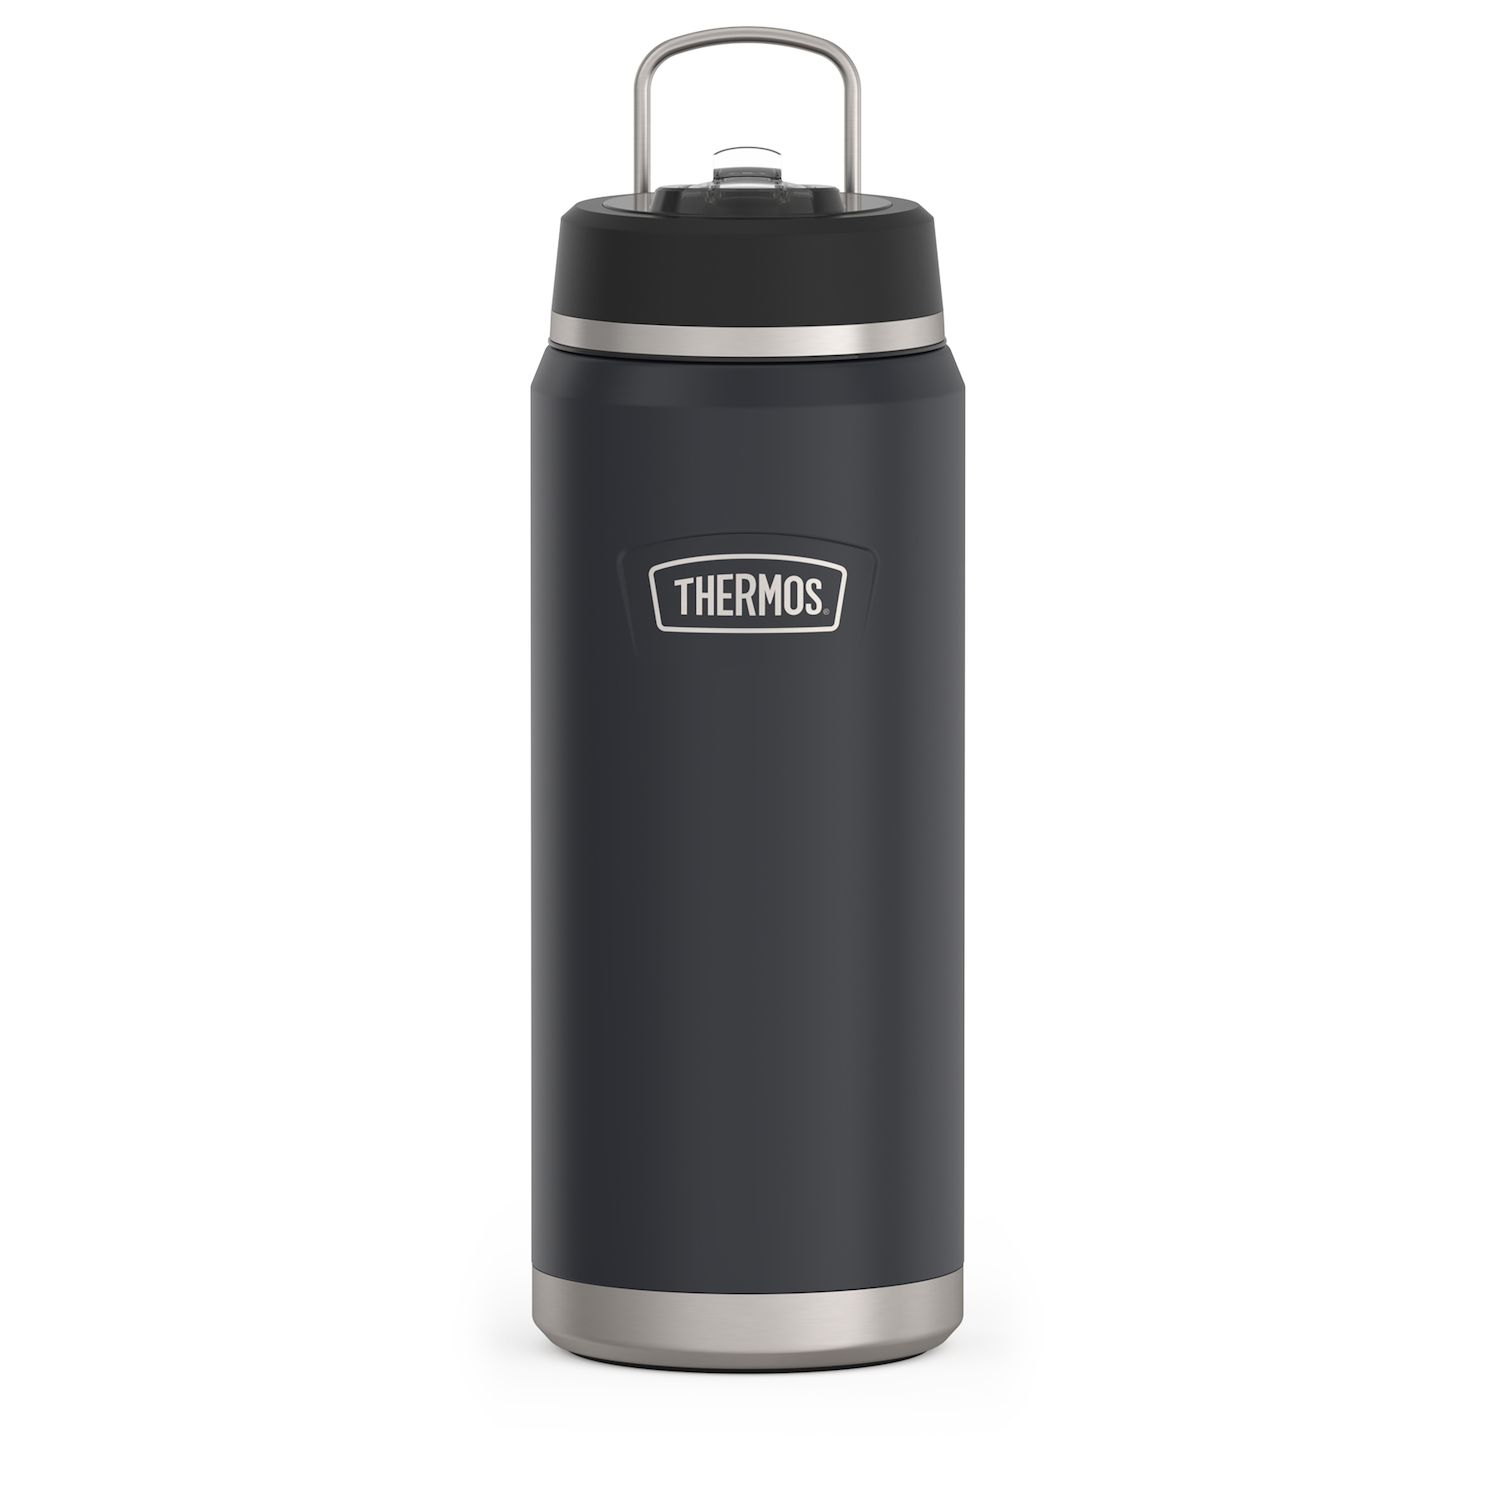 Large Thermos Bottle